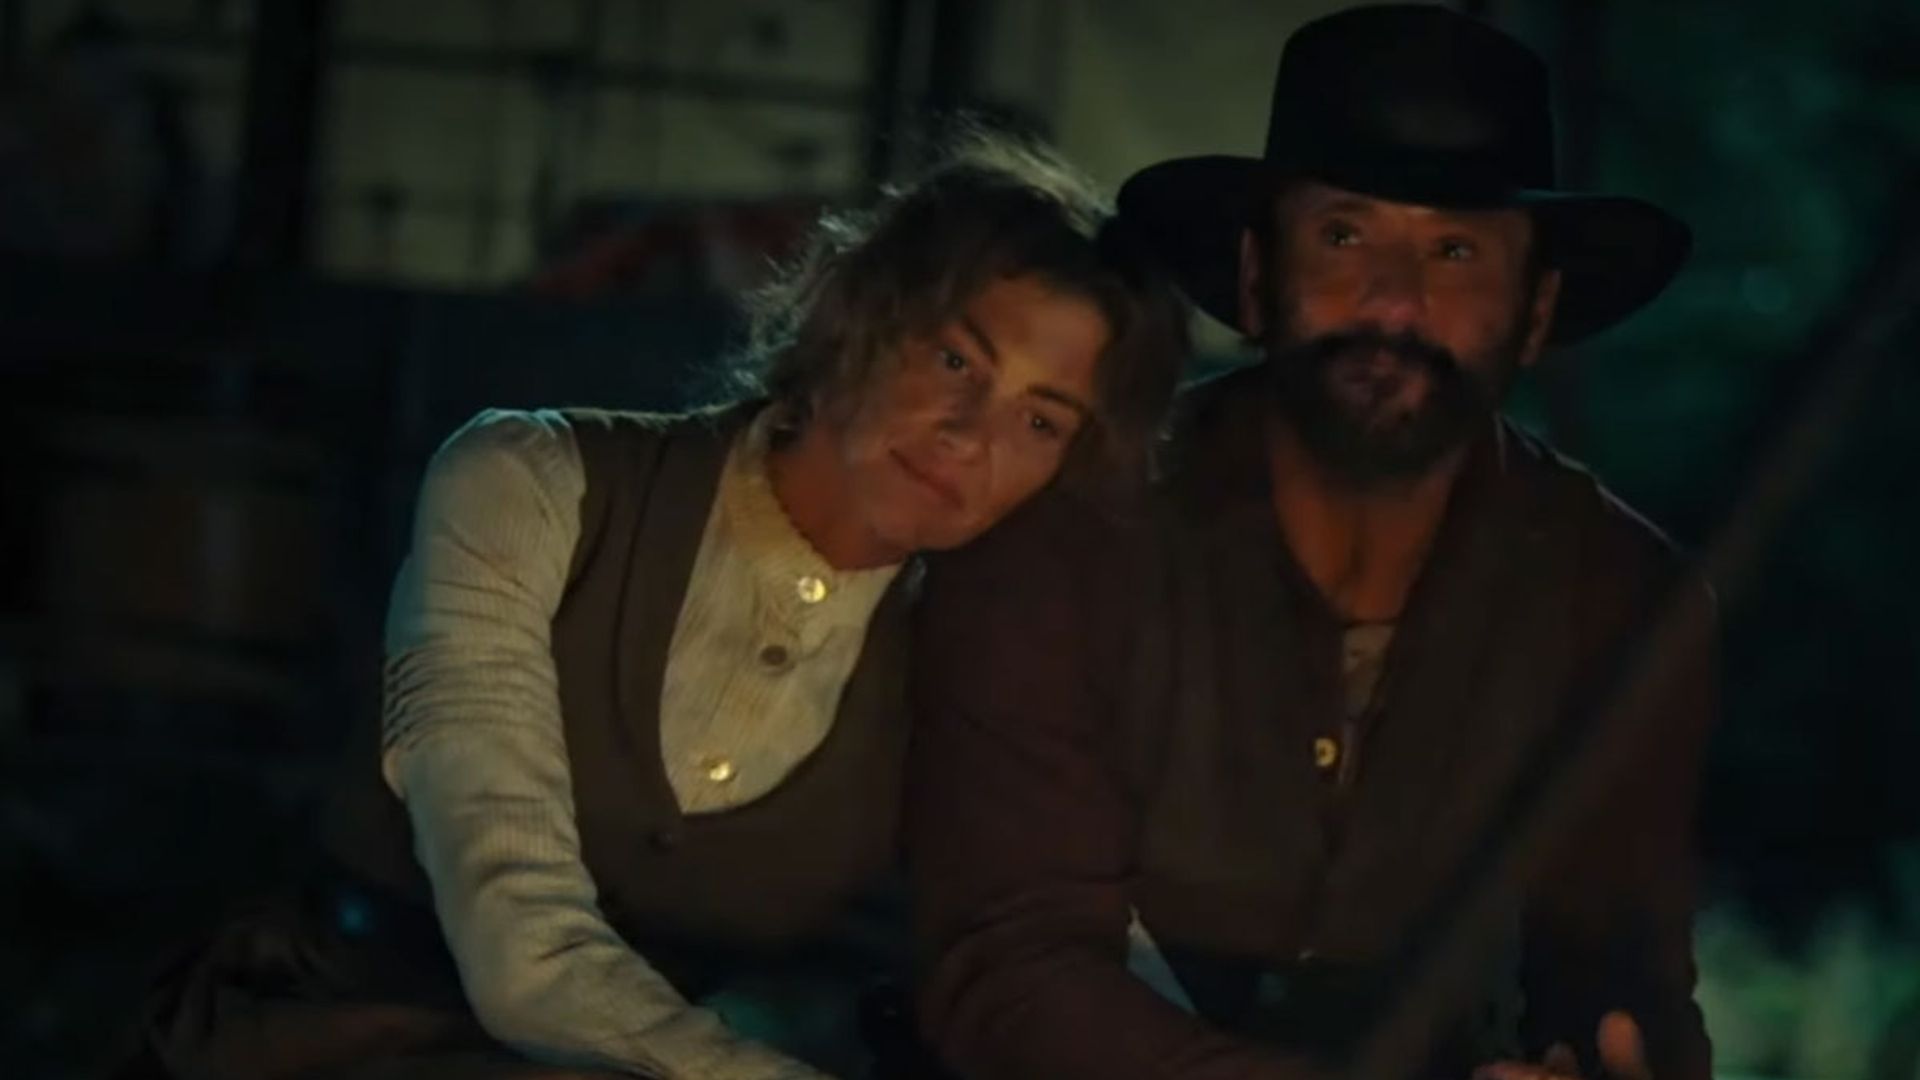 Faith Hill and Tim McGraw get steamy in first trailer for Yellowstone spinoff 1883